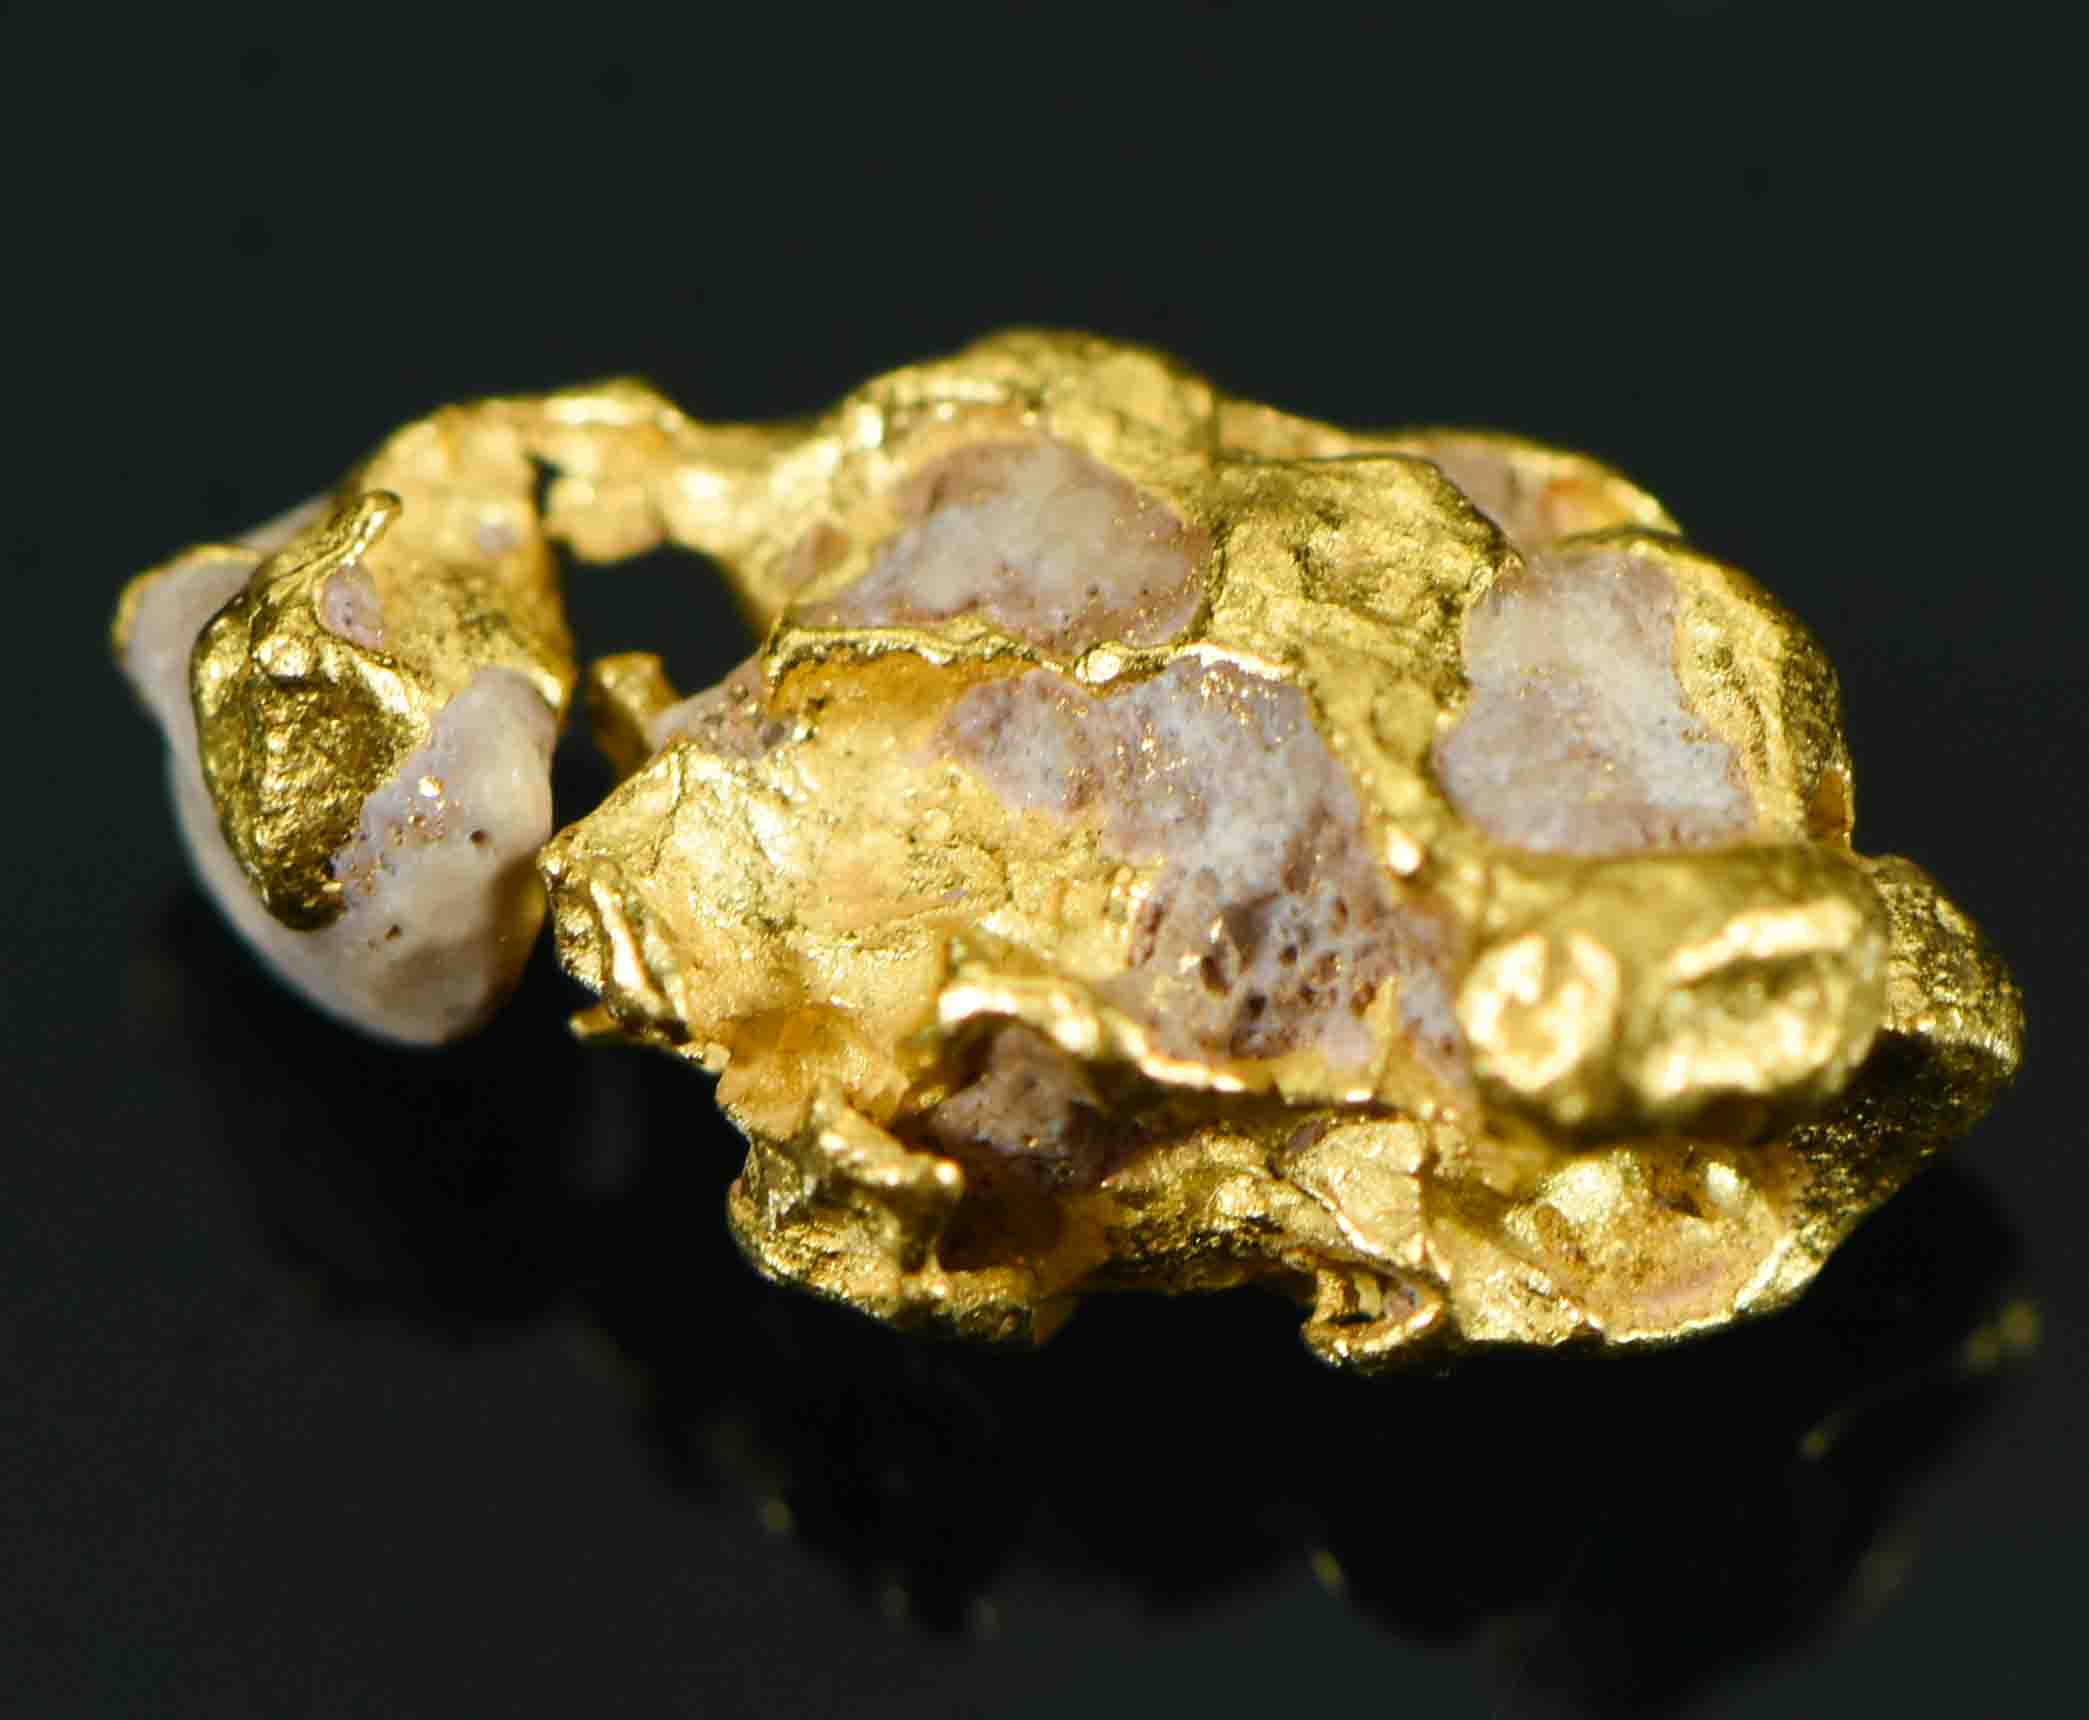 #1 Australian Natural Gold Nugget With Quartz Weighs .94 Grams.